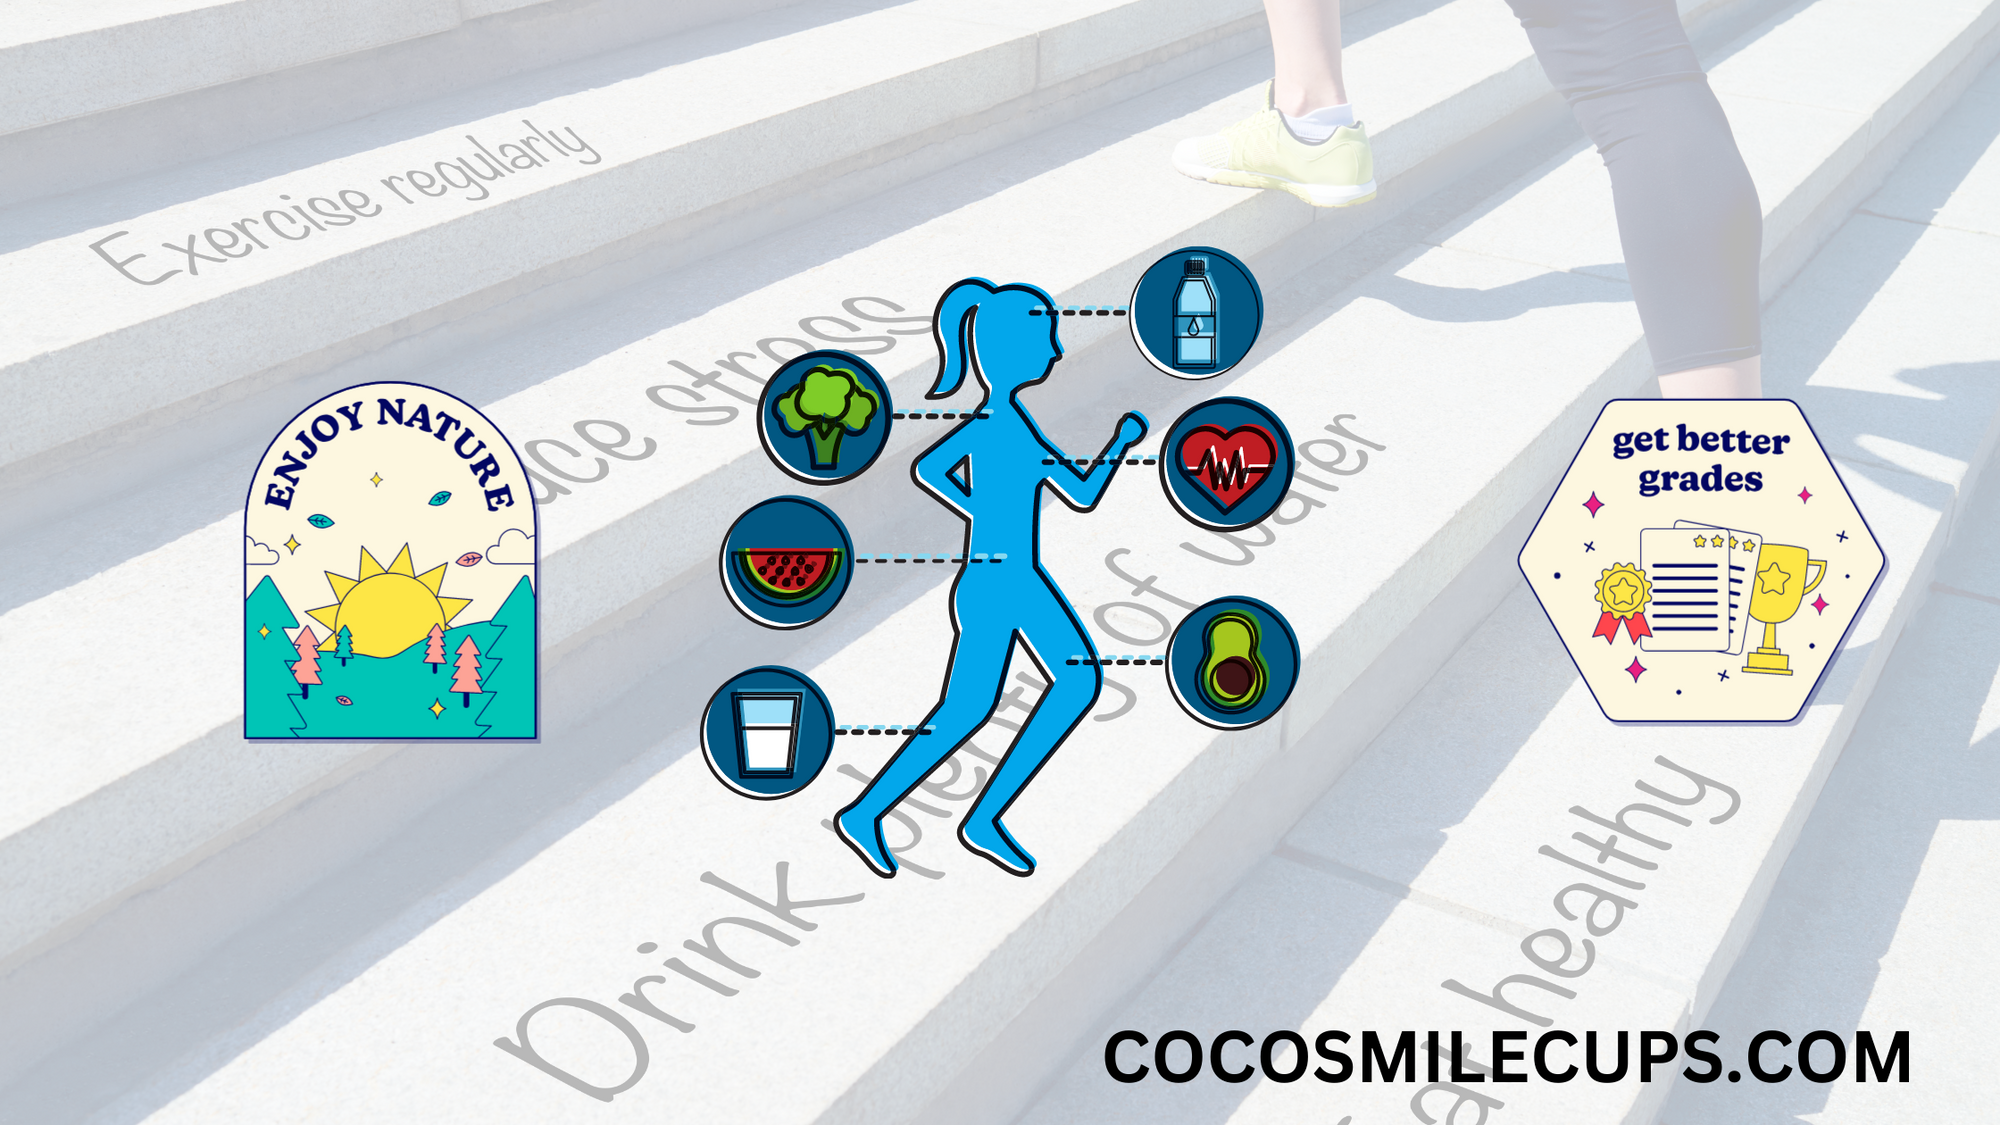 Cocosmile cups are the best choice for anyone who wants to stay hydrated and healthy.